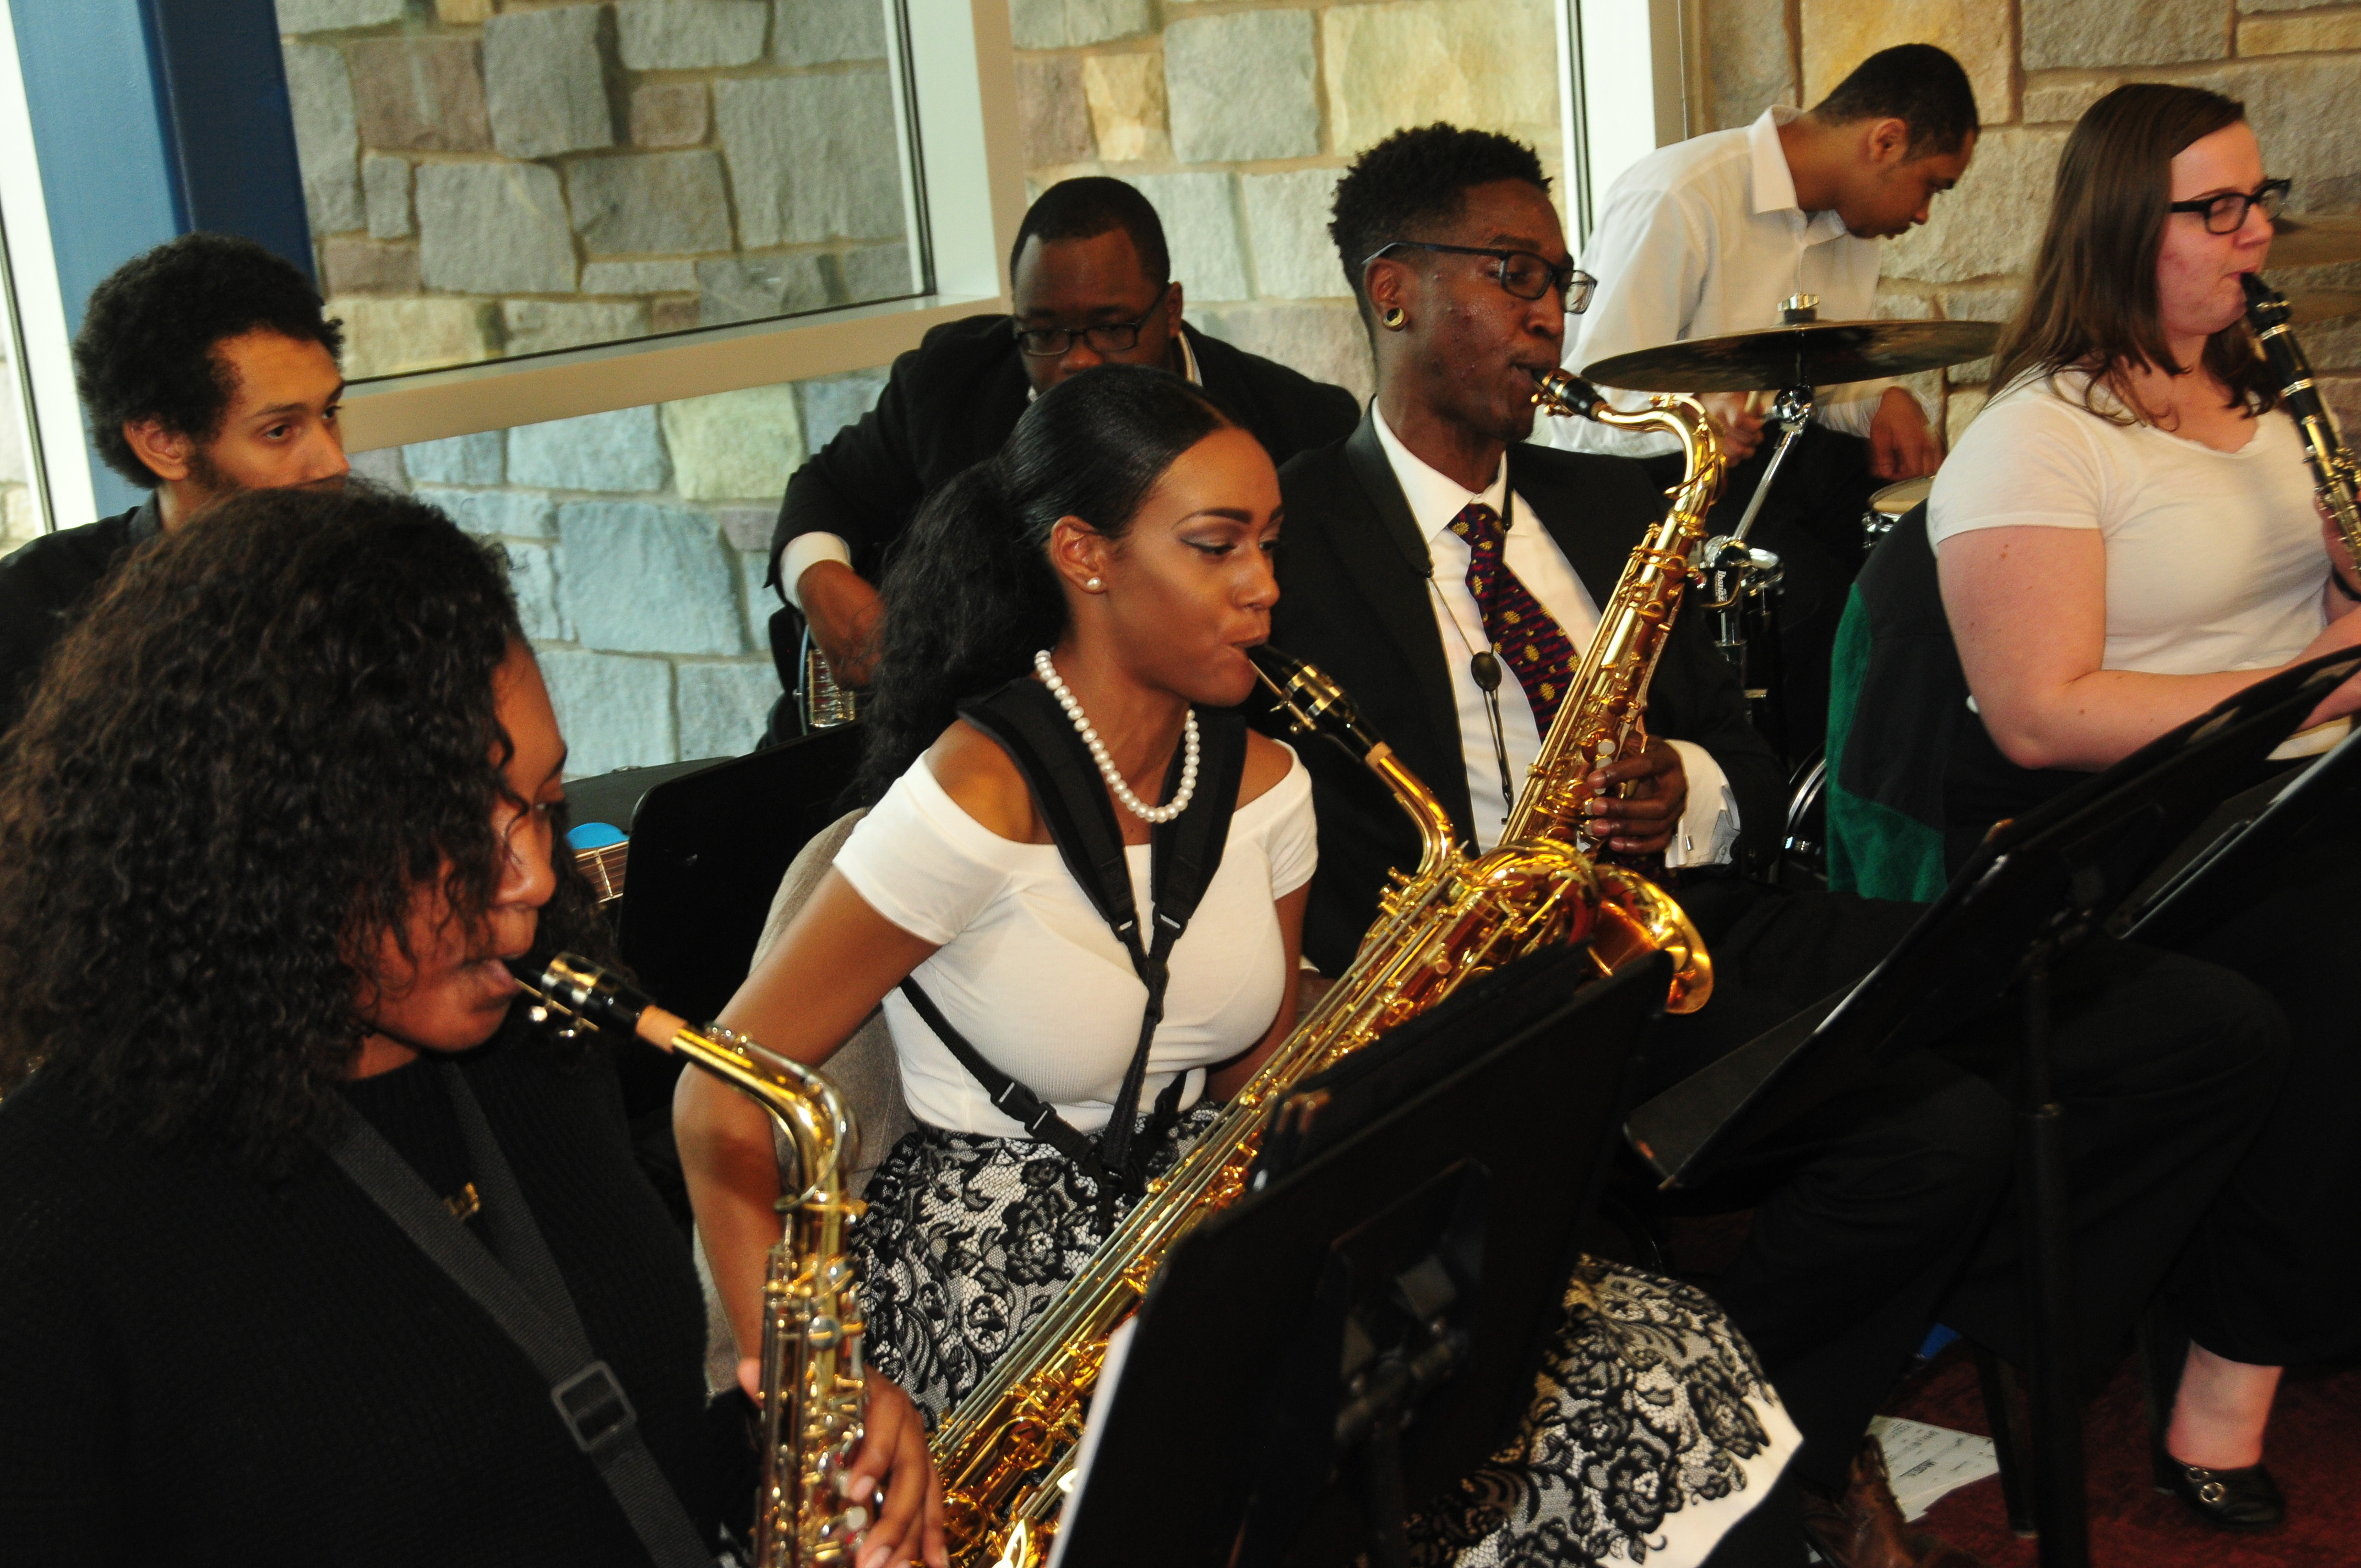 The DSU Jazz Band (pictured) will be joined by the DSU Concert Band in the annual Spring Concert